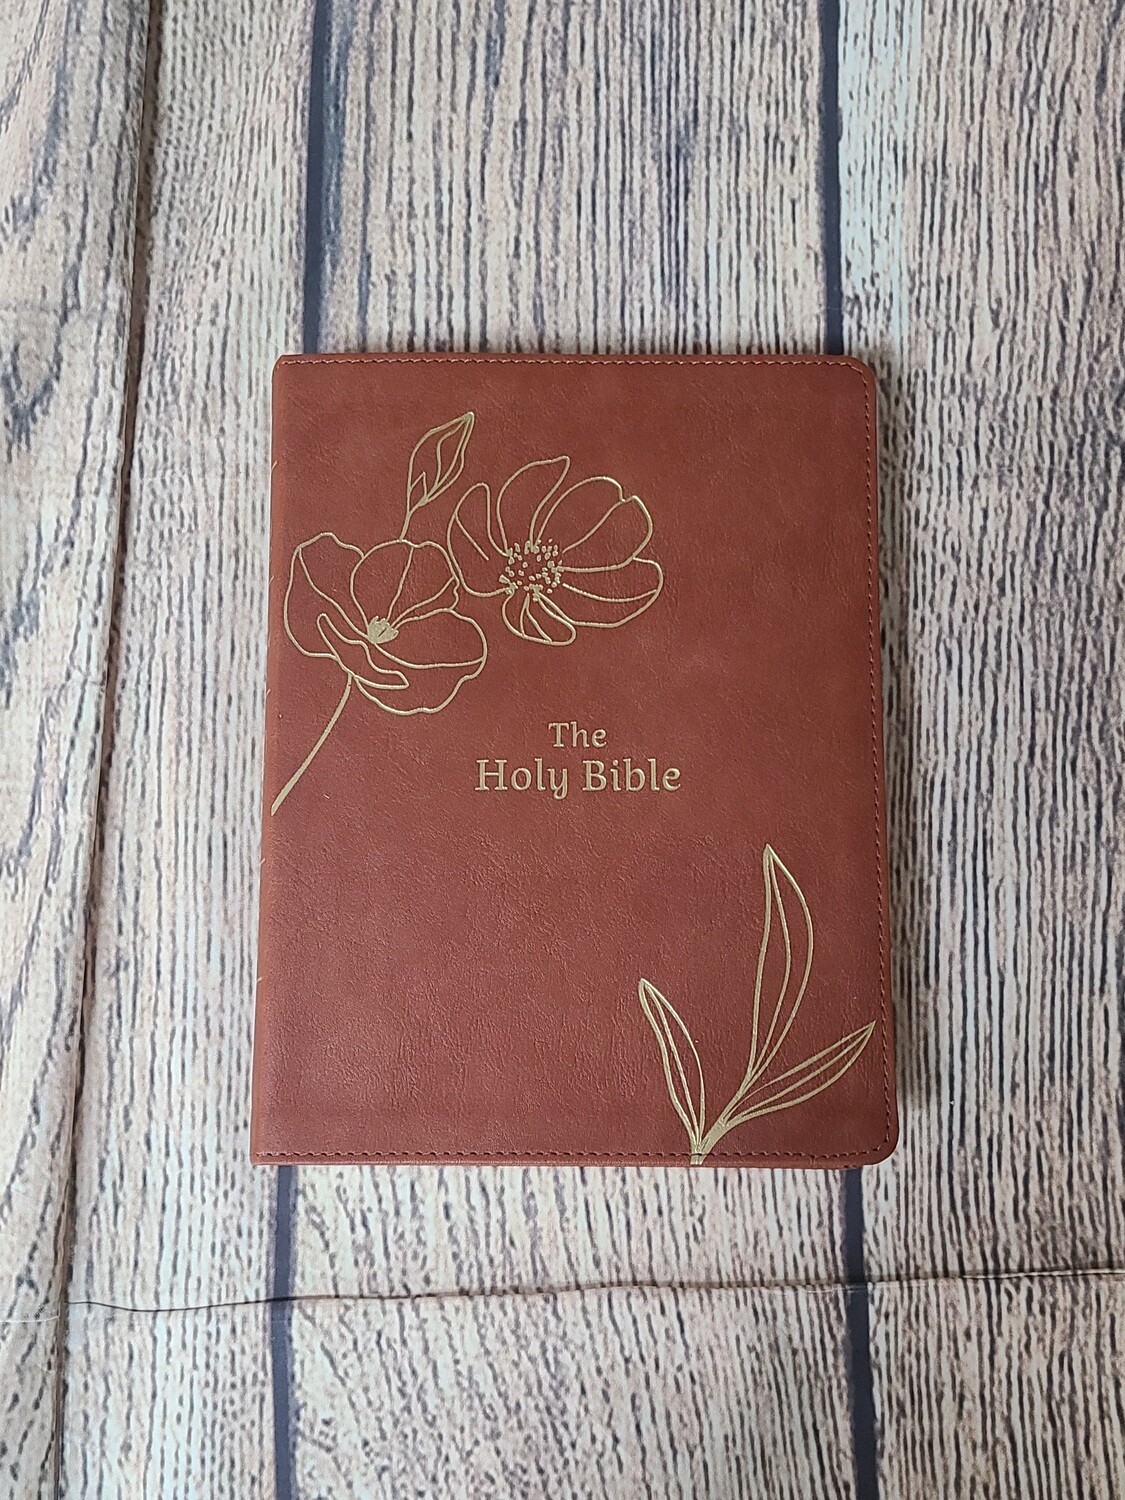 KJV Simplified Holy Bible Promise Book Edition - Chestnut Floral Soft-Leather Look